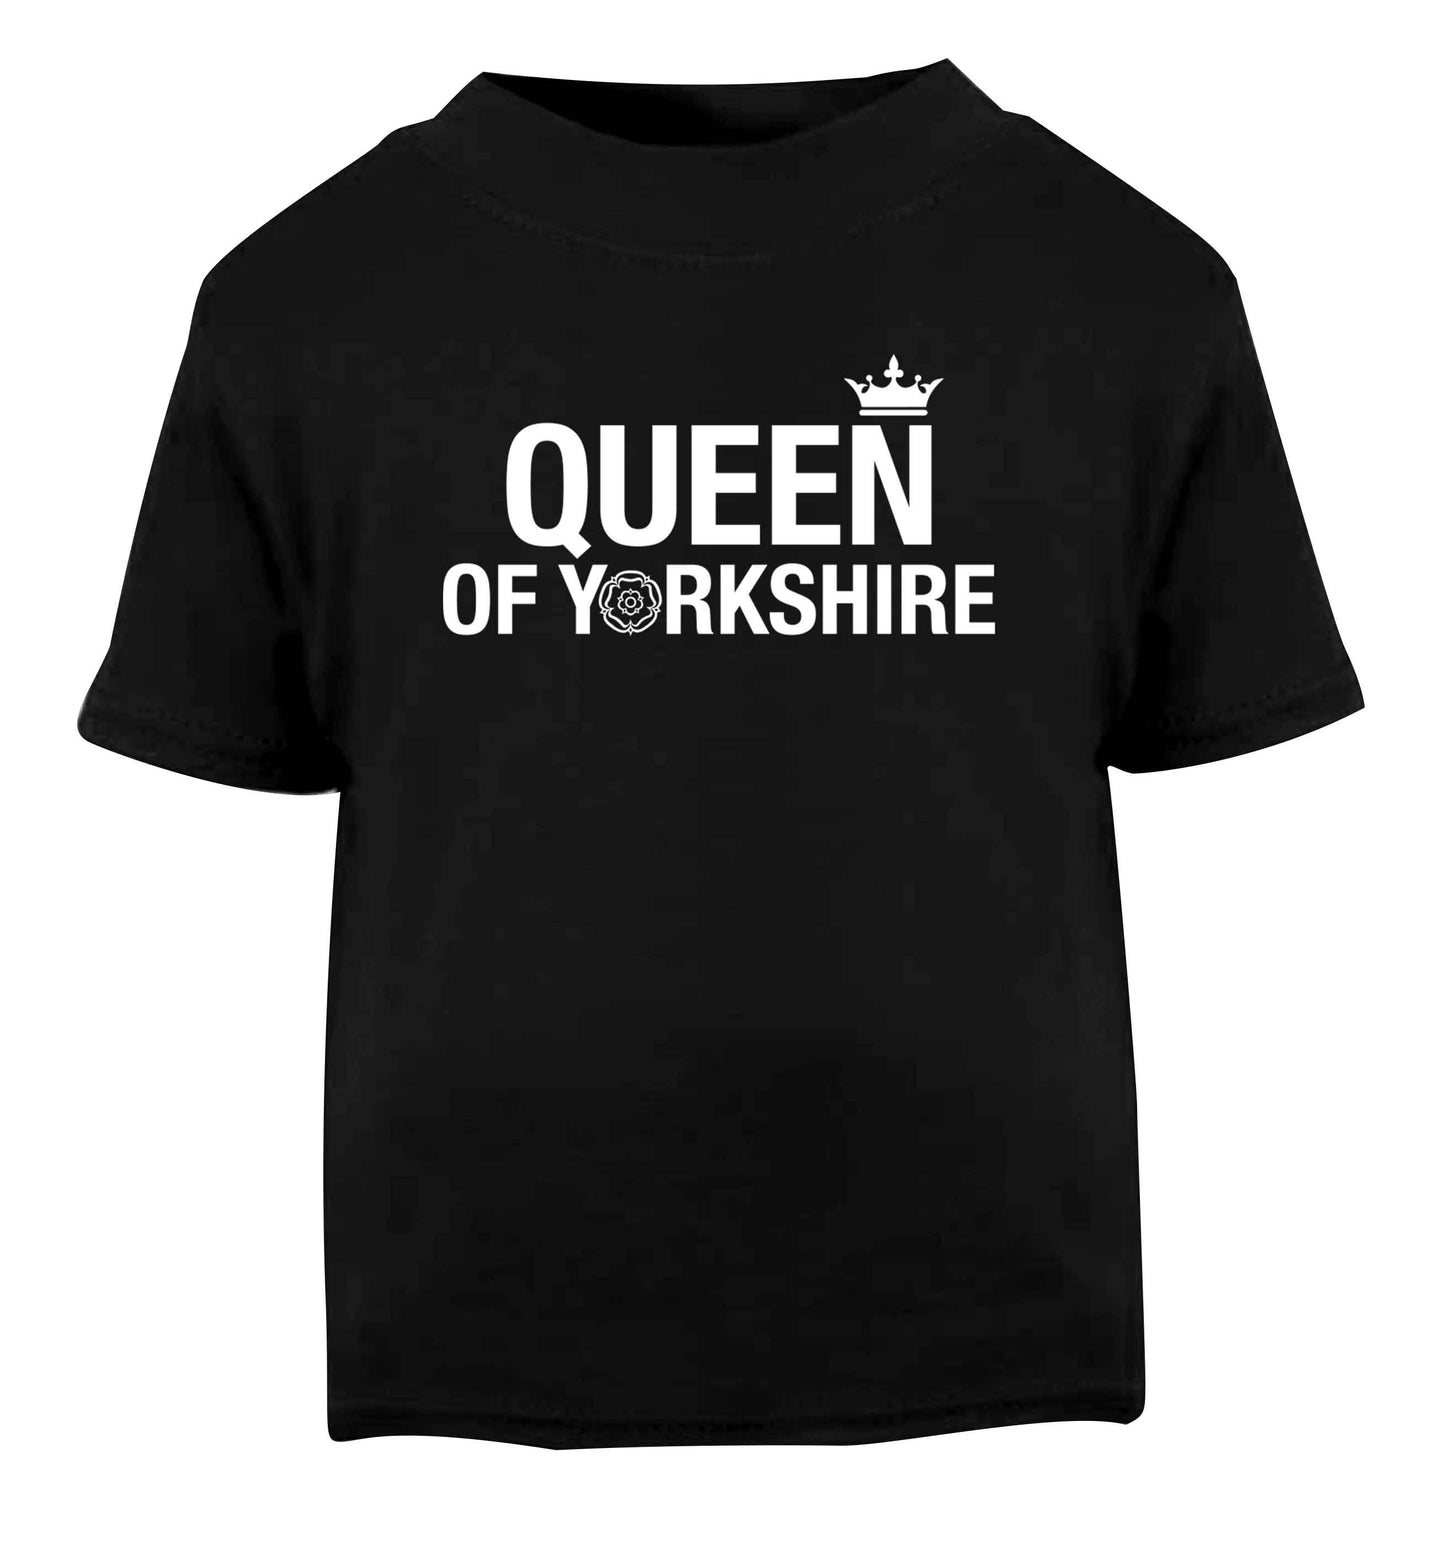 Queen of Yorkshire Black Baby Toddler Tshirt 2 years